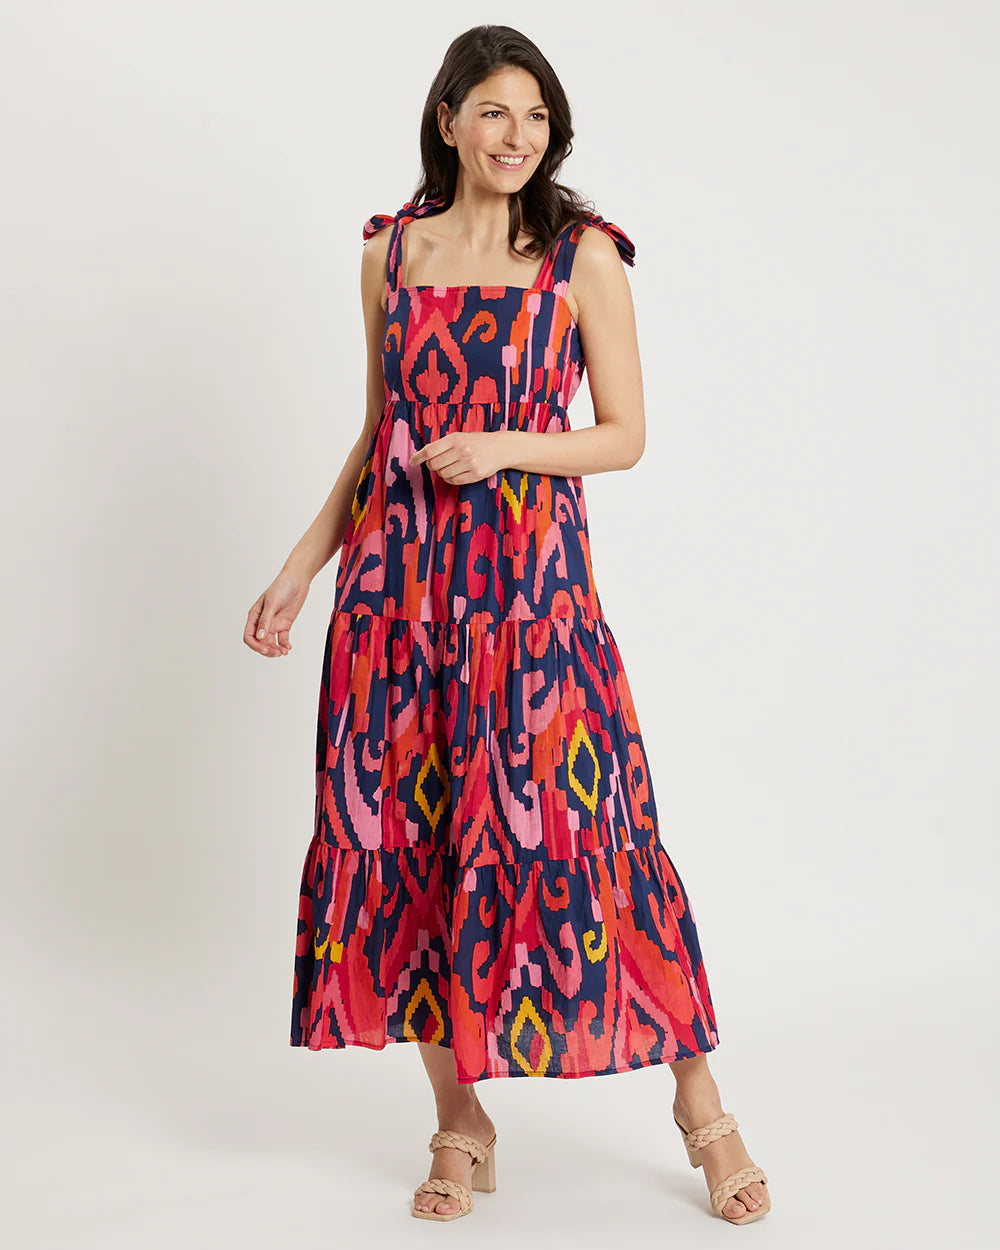 Jude Connally Rose Dress Cotton Voile